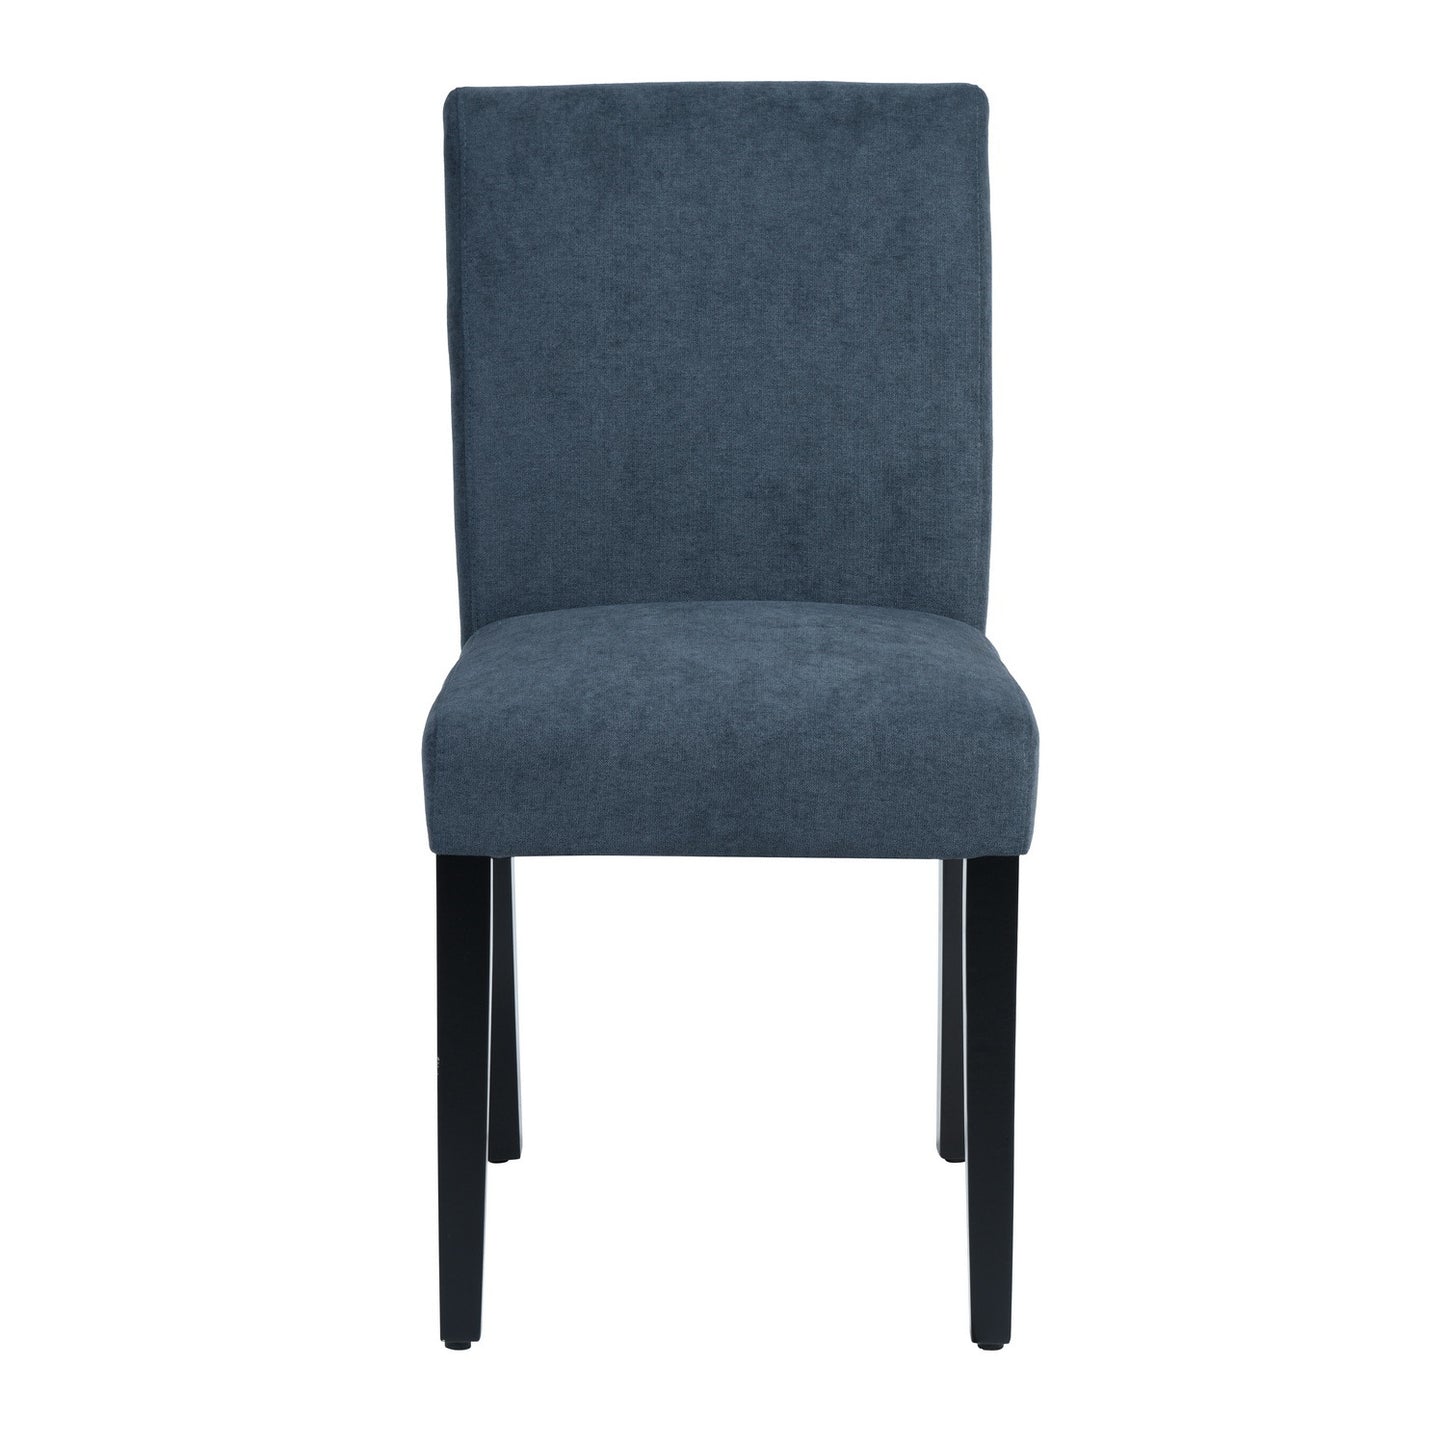 Upholstered Dining Chairs Set of 2 Modern Dining Chairs with Solid Wood Legs;  Dark Blue